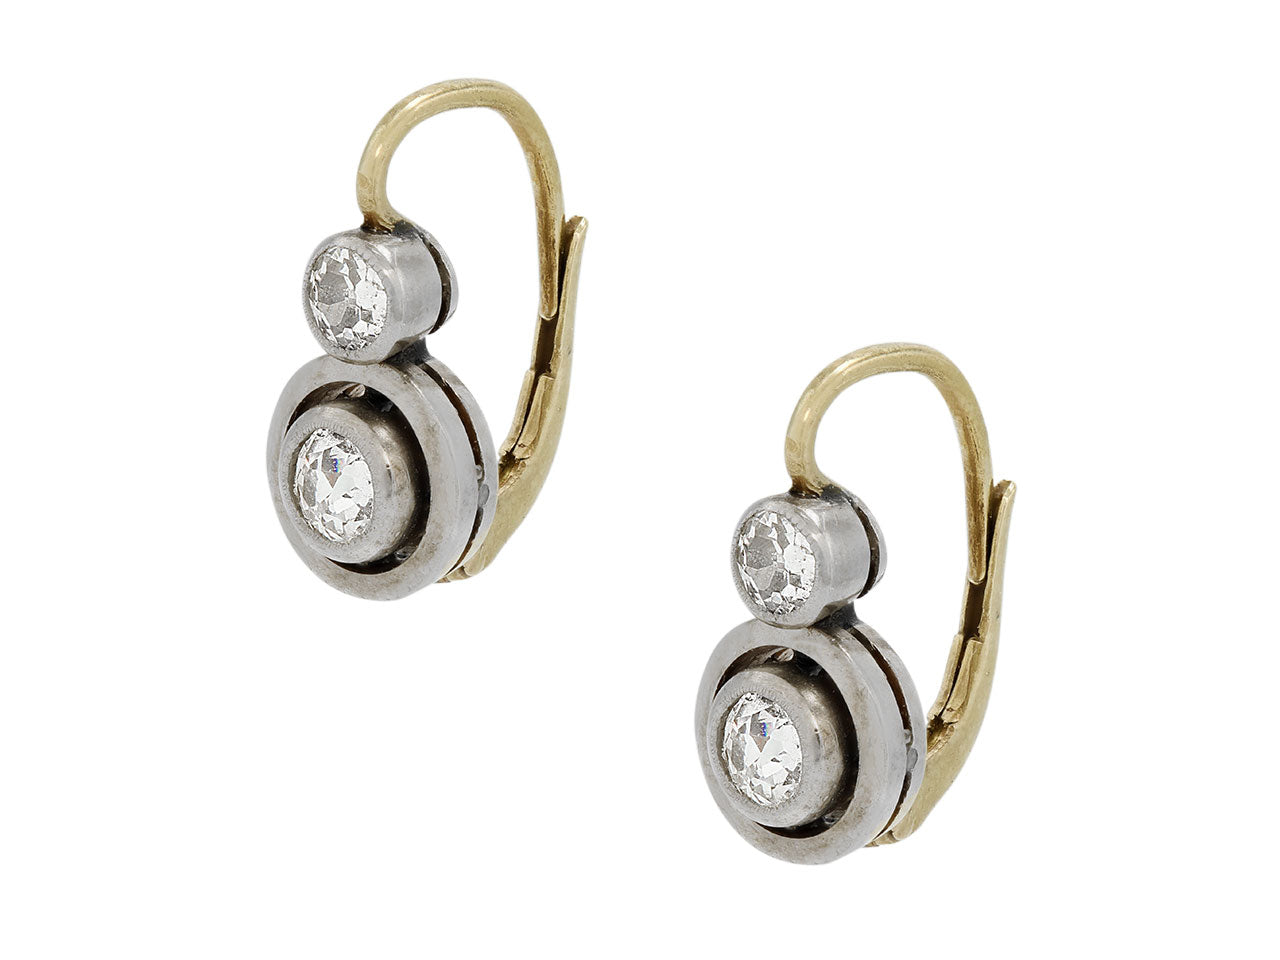 Antique Victorian Old Mine-cut Diamond Earrings in Silver and 14K